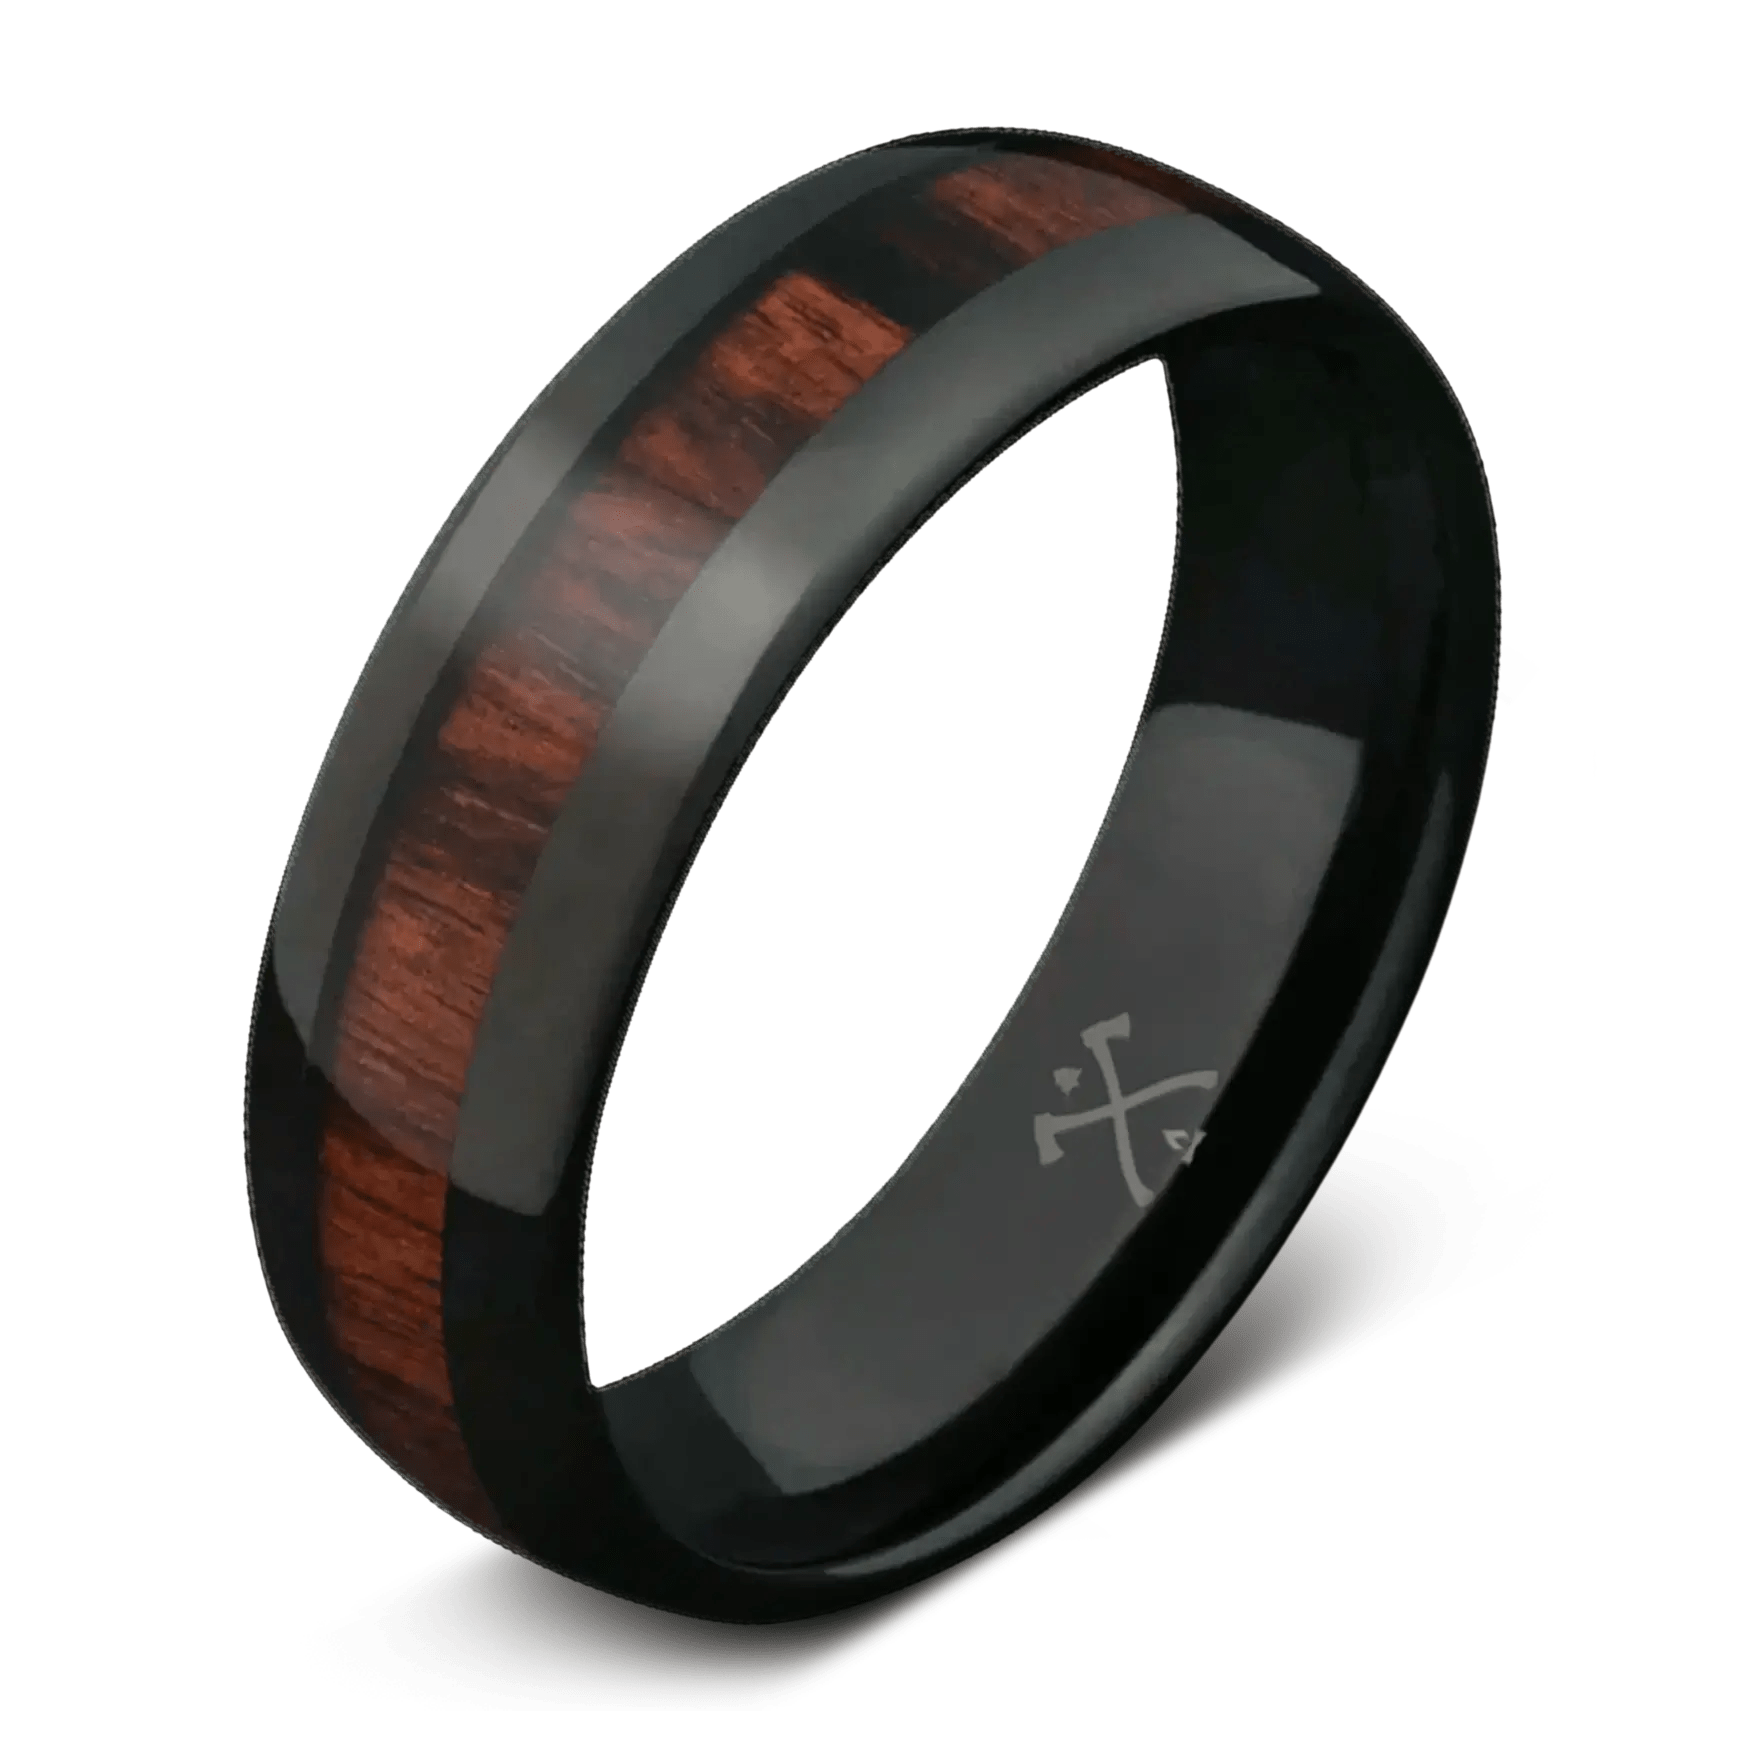 The Cowboy Ring (Koa Wood & Tungsten Ring) - Manly Bands